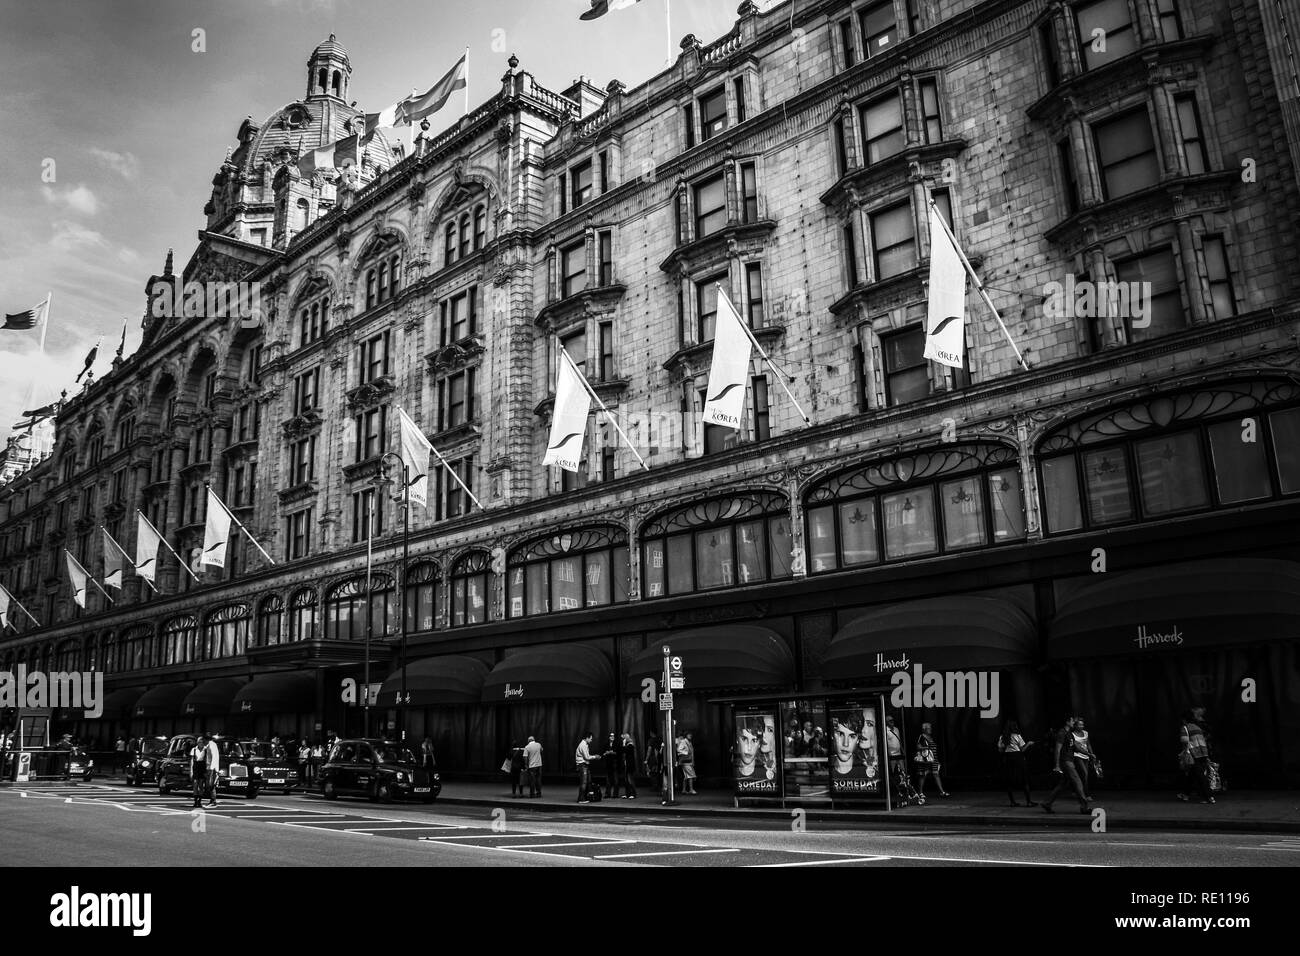 Old-fashioned black and white photography of the Harrods department store in London, United Kingdom Stock Photo